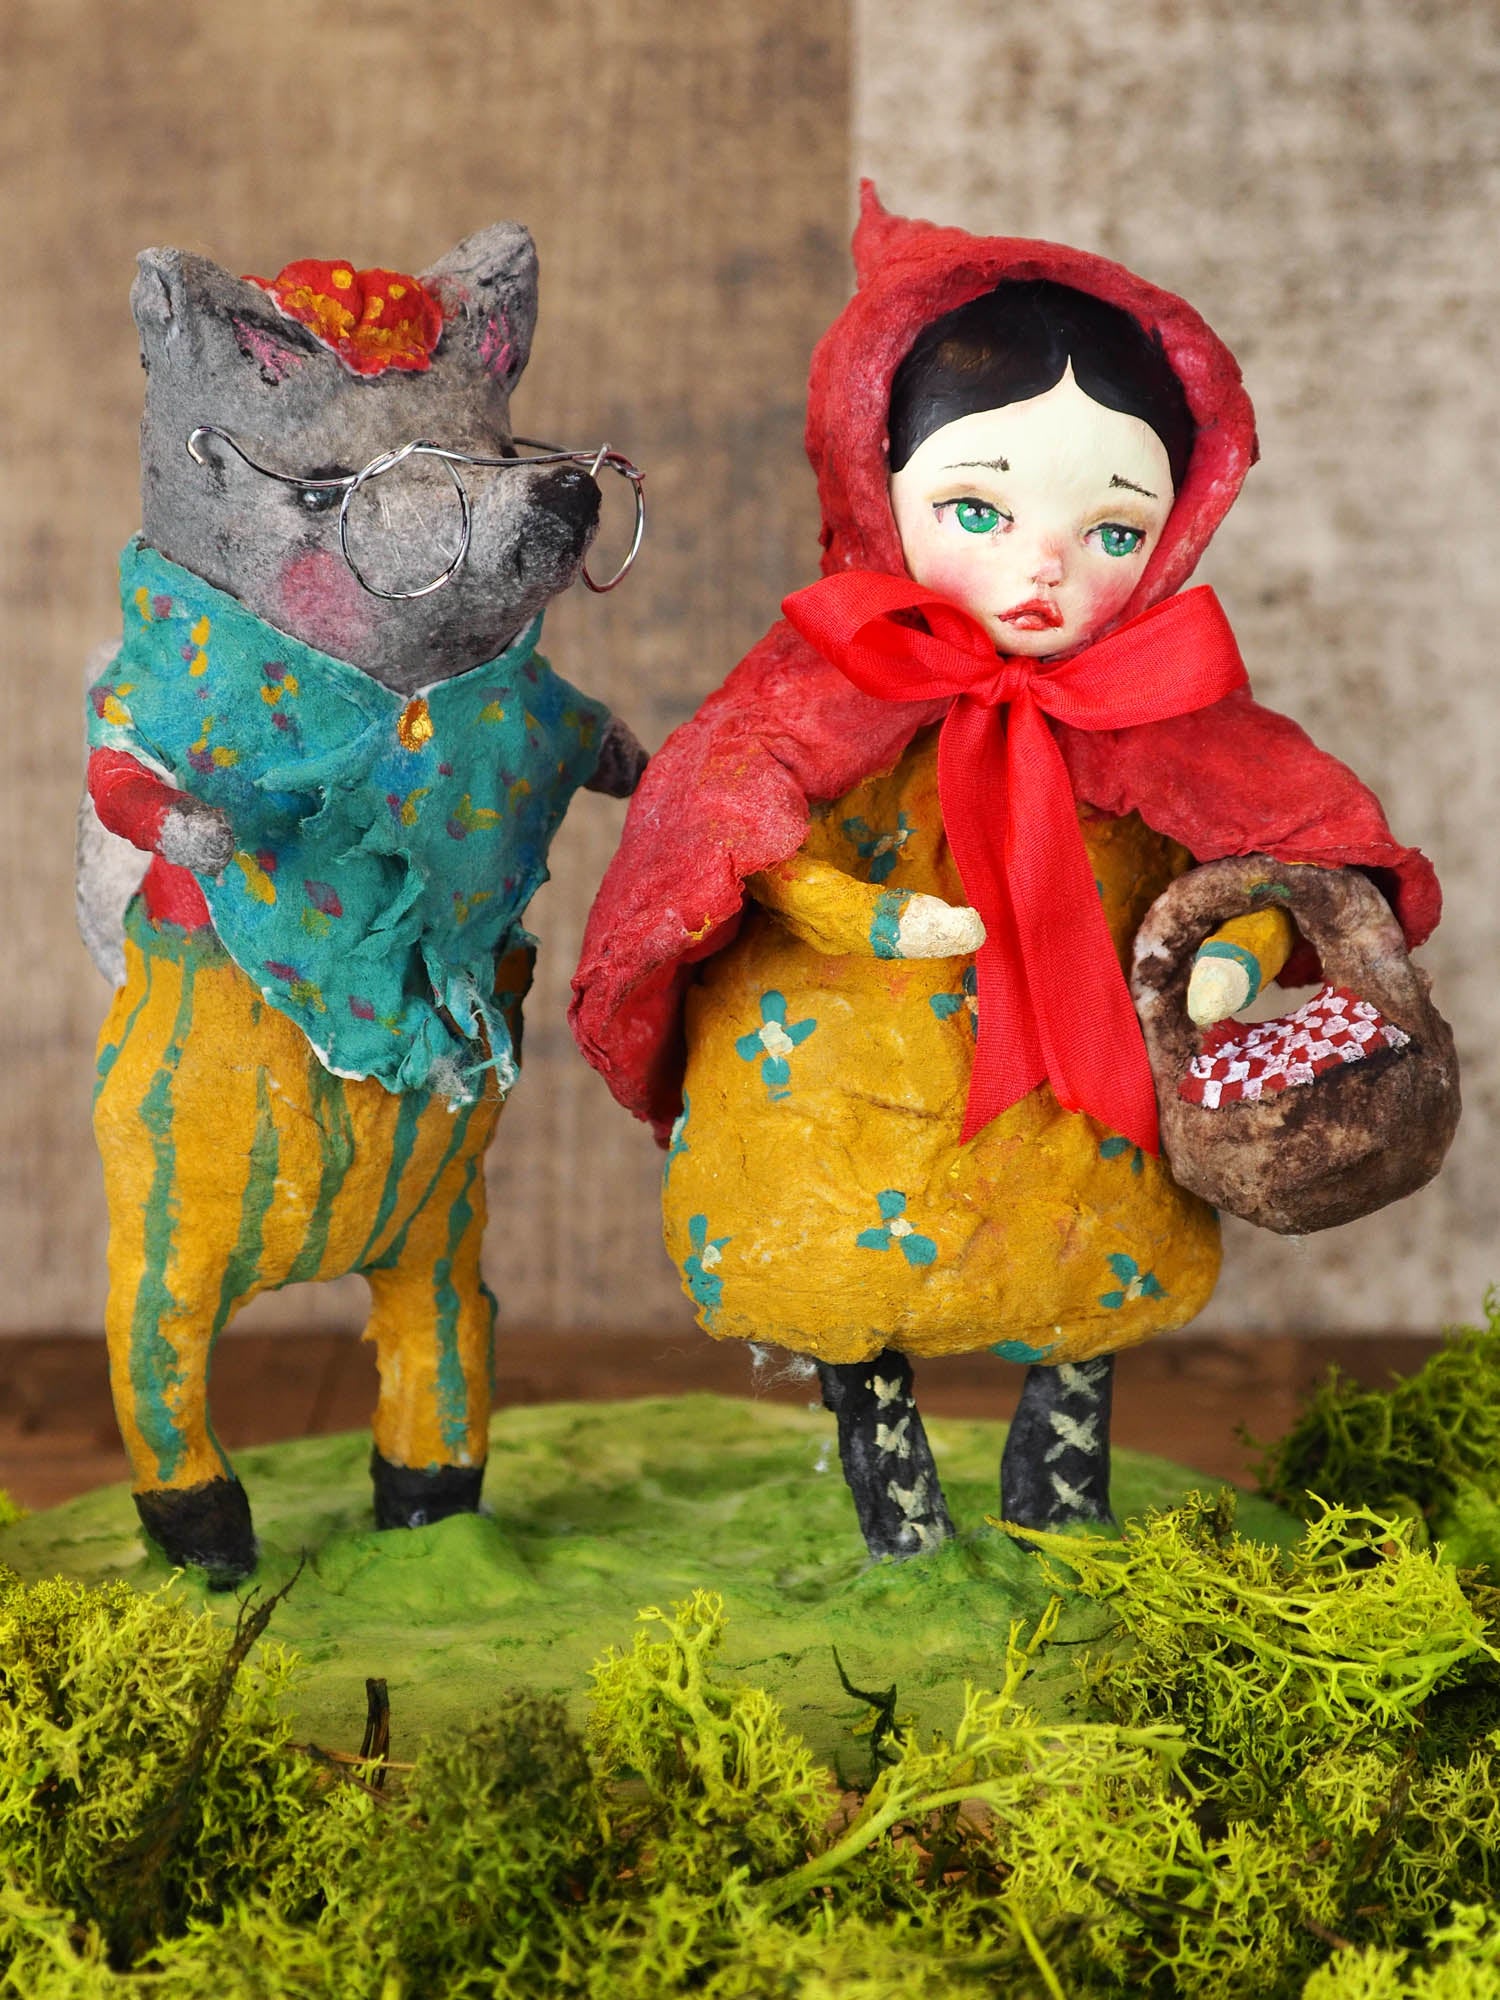 LITTLE RED RIDING HOOD AND THE BIG BAD WOLF - Original sculpted paper clay art doll by Danita, Art Doll by Danita Art